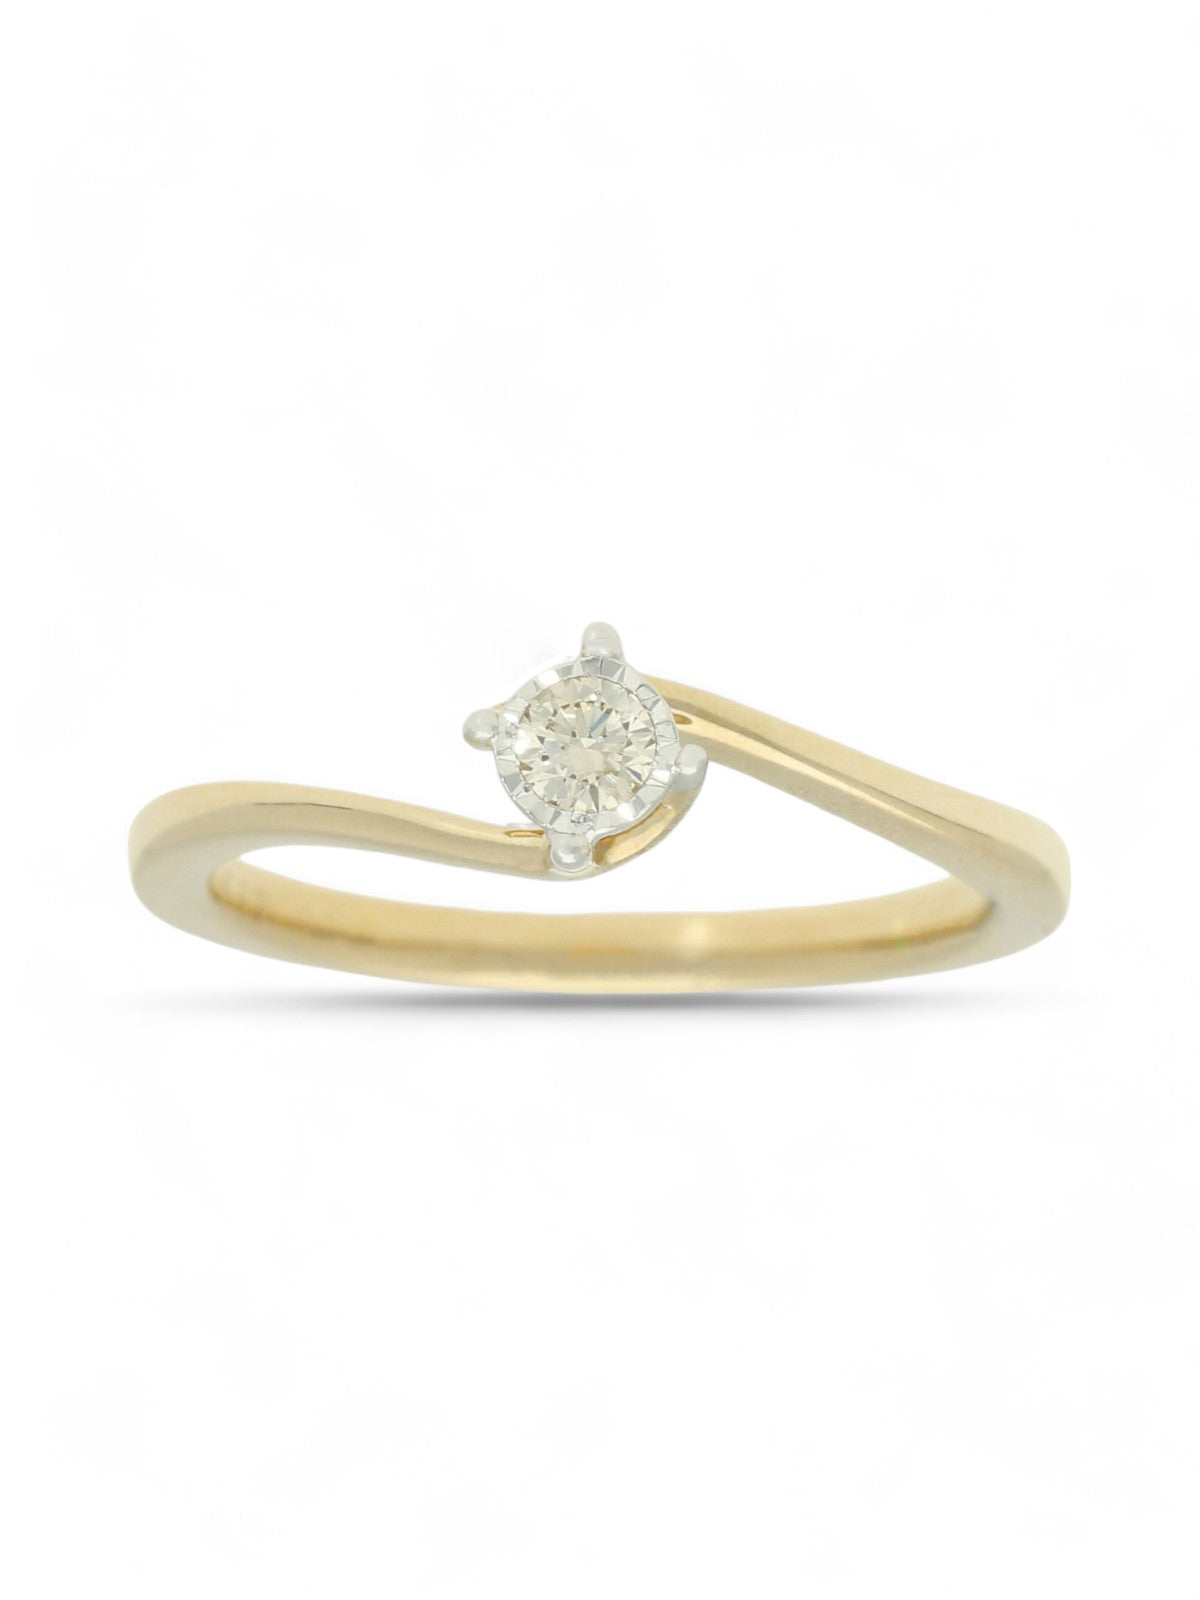 Diamond Solitaire Miracle Set Engagement Ring 0.10ct Round Brilliant in 9ct Yellow Gold